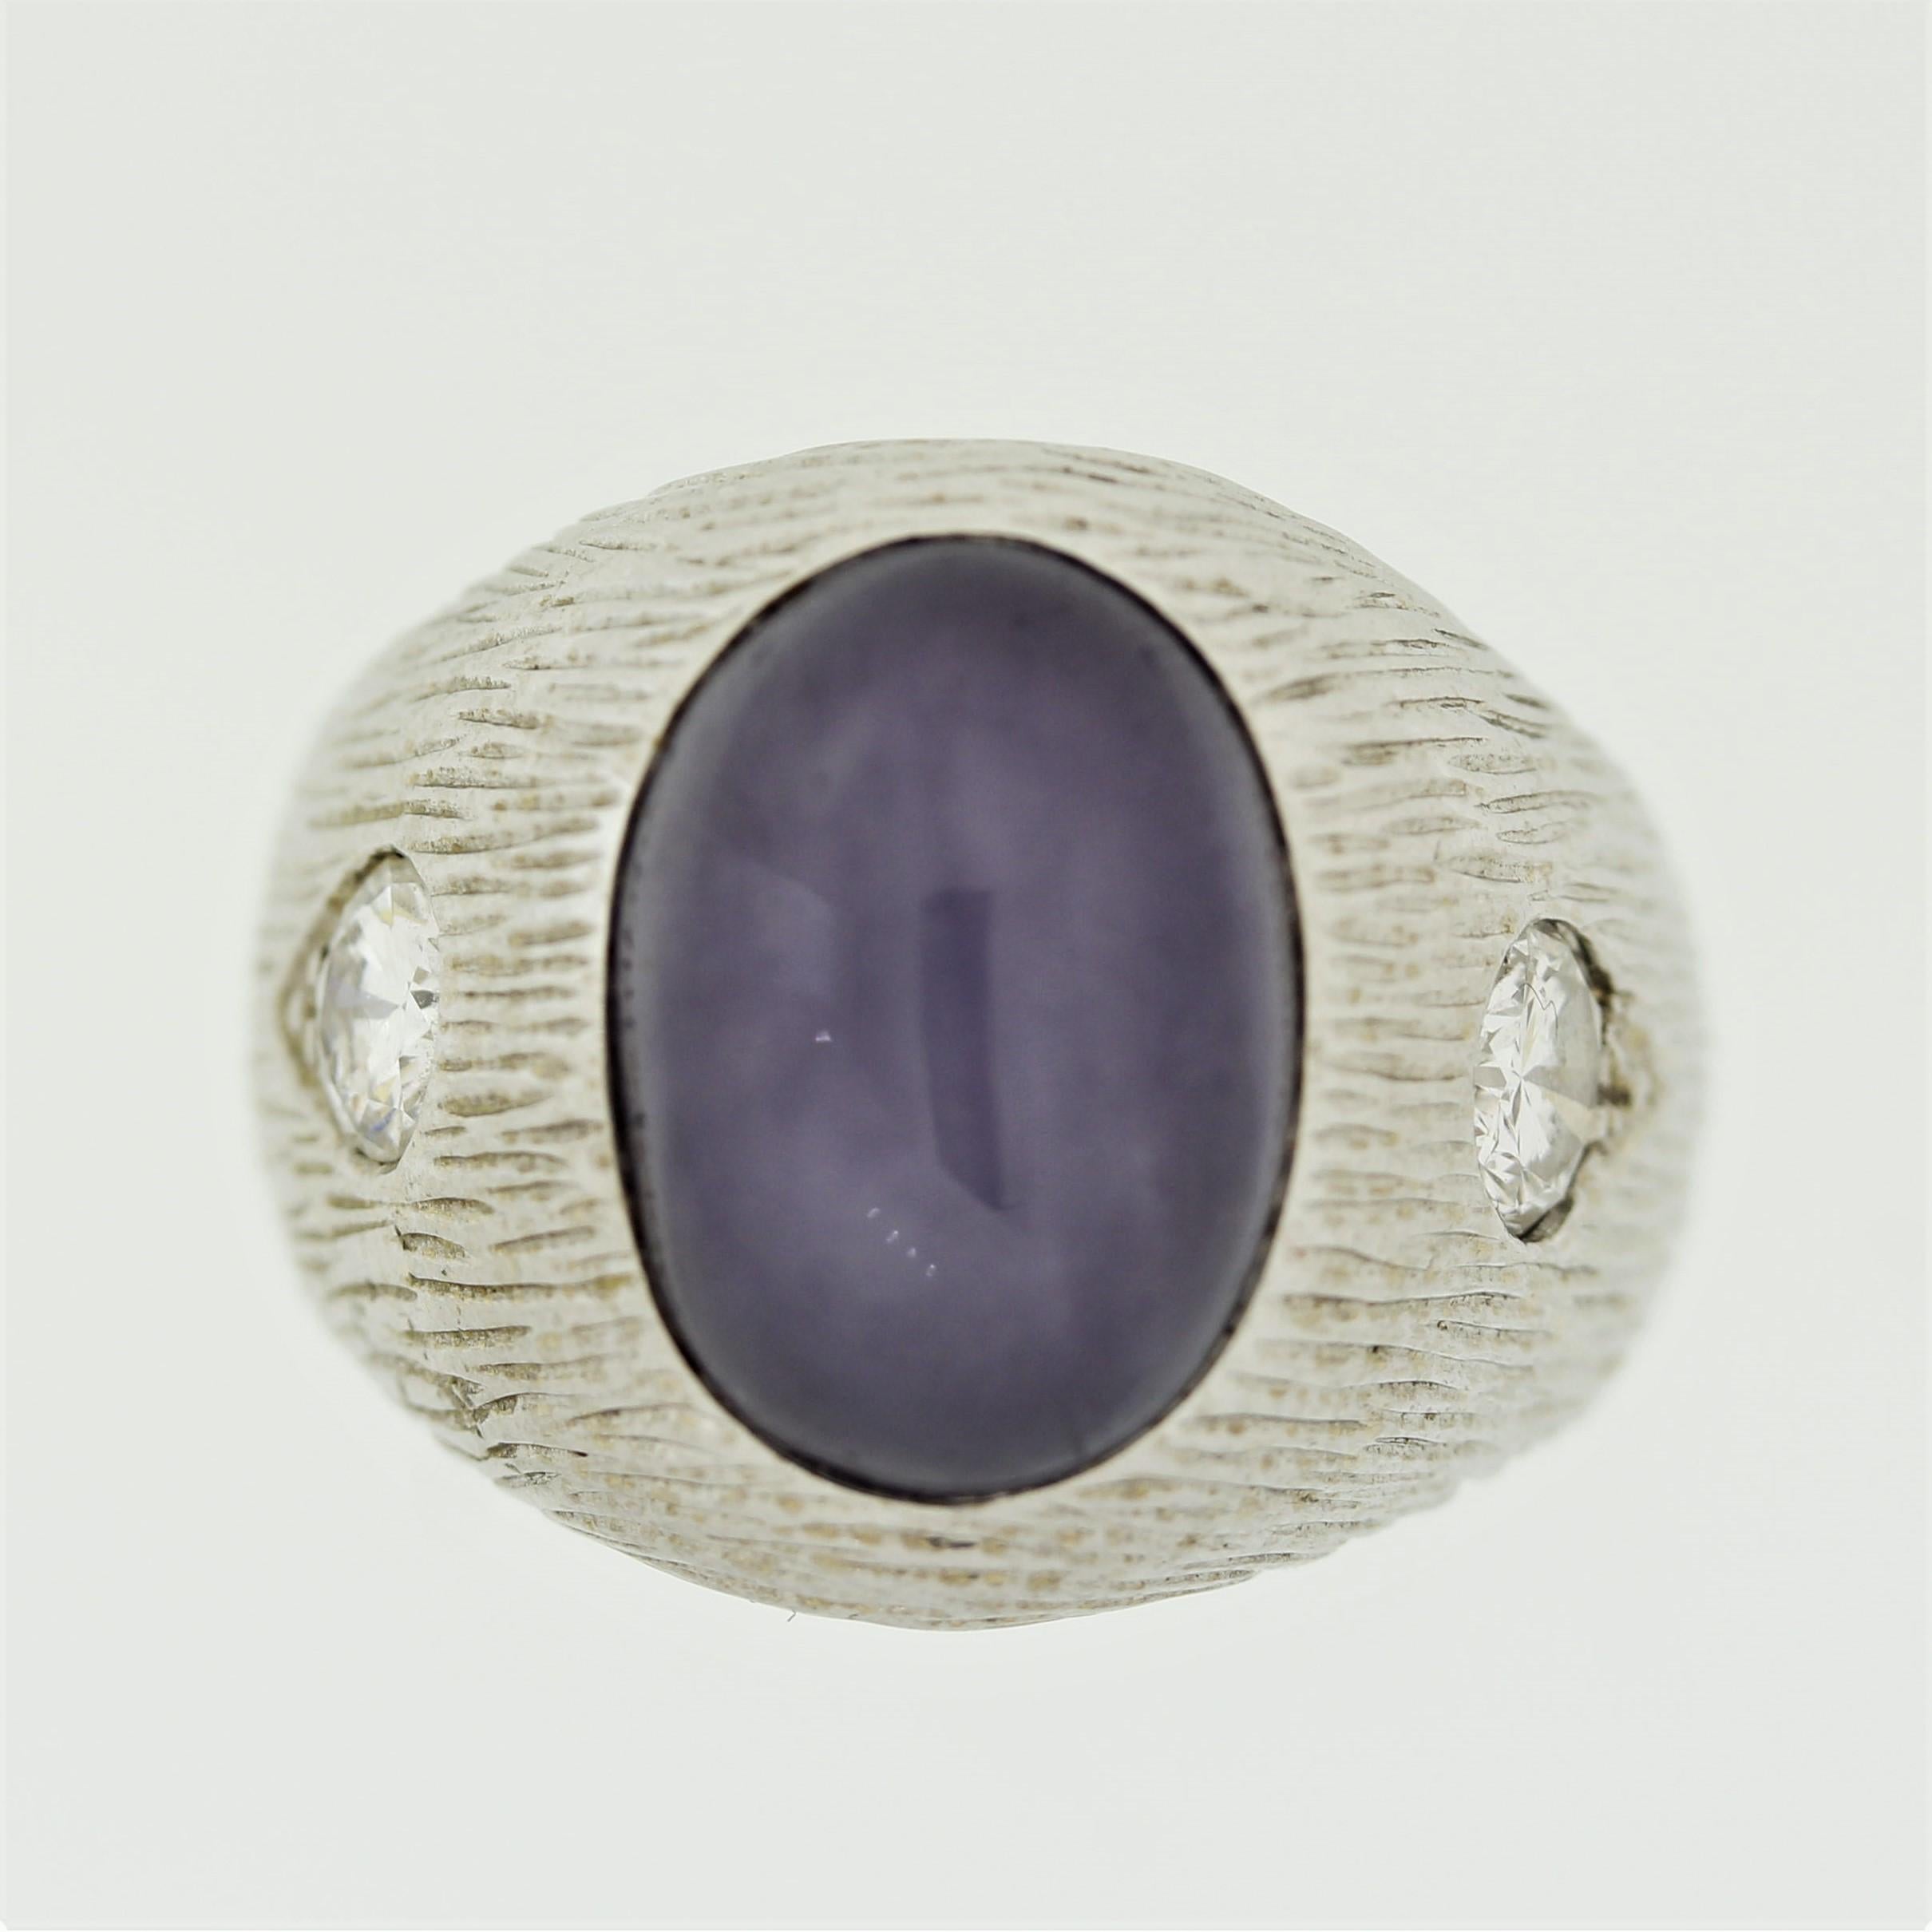 A simple yet stylish men’s ring featuring an approximately 19.70 carat natural star sapphire. It has a pleasing purple-blue color with a prominent star and is free of any treatments. It is accented by two large round brilliant-cut diamonds weighing